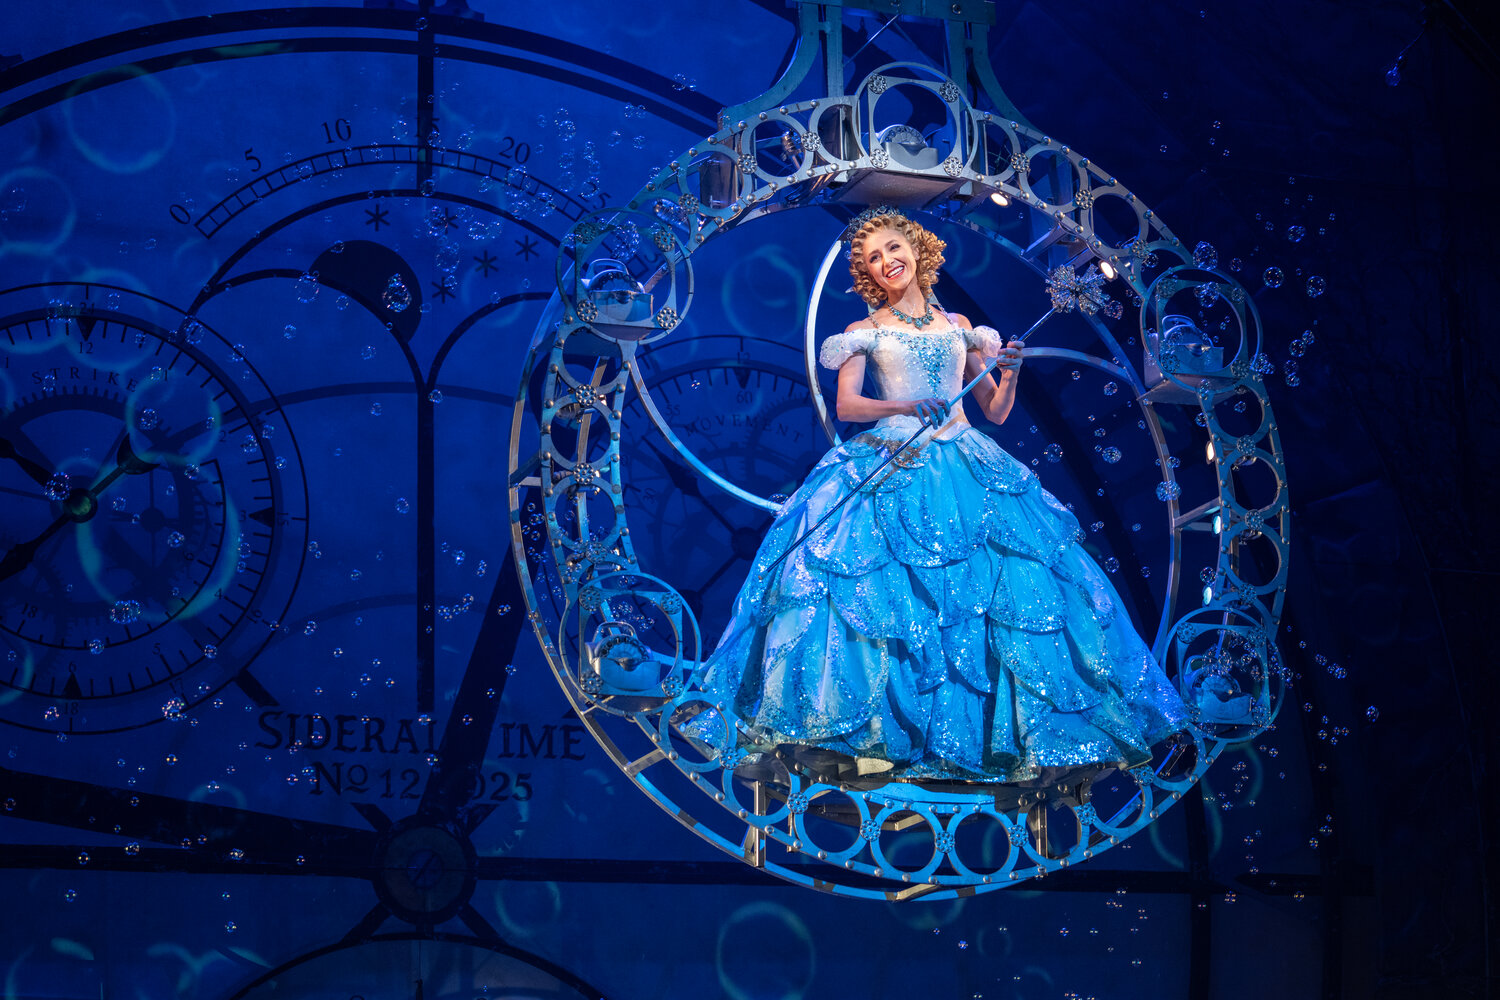 Celia Hottenstein plays the “good” witch, Glinda, in the national touring company of “Wicked,” performing at the Wharton Center through May 28.